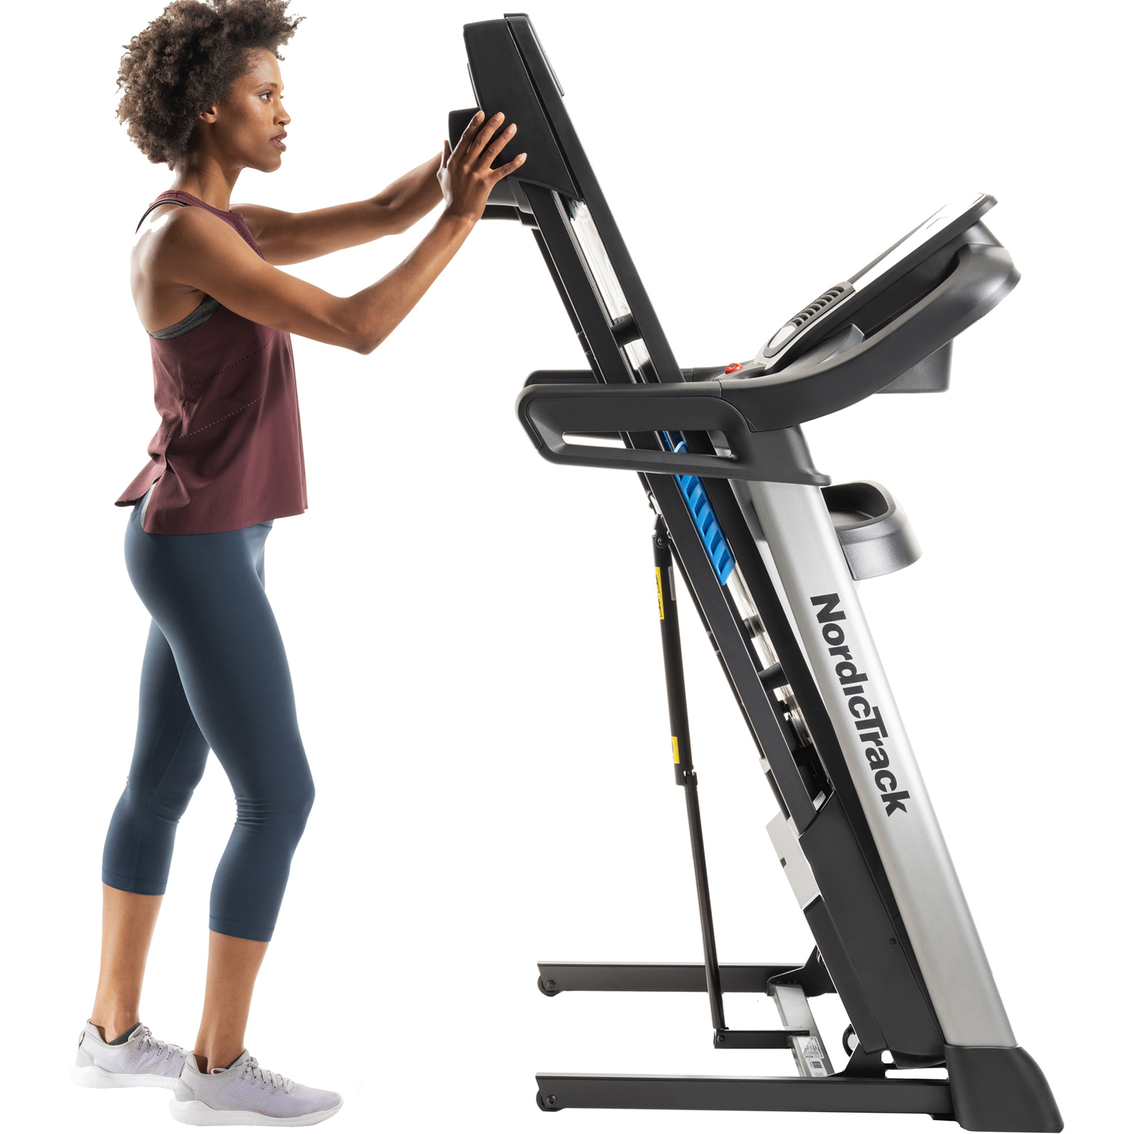 NordicTrack S25i Treadmill - Image 4 of 4